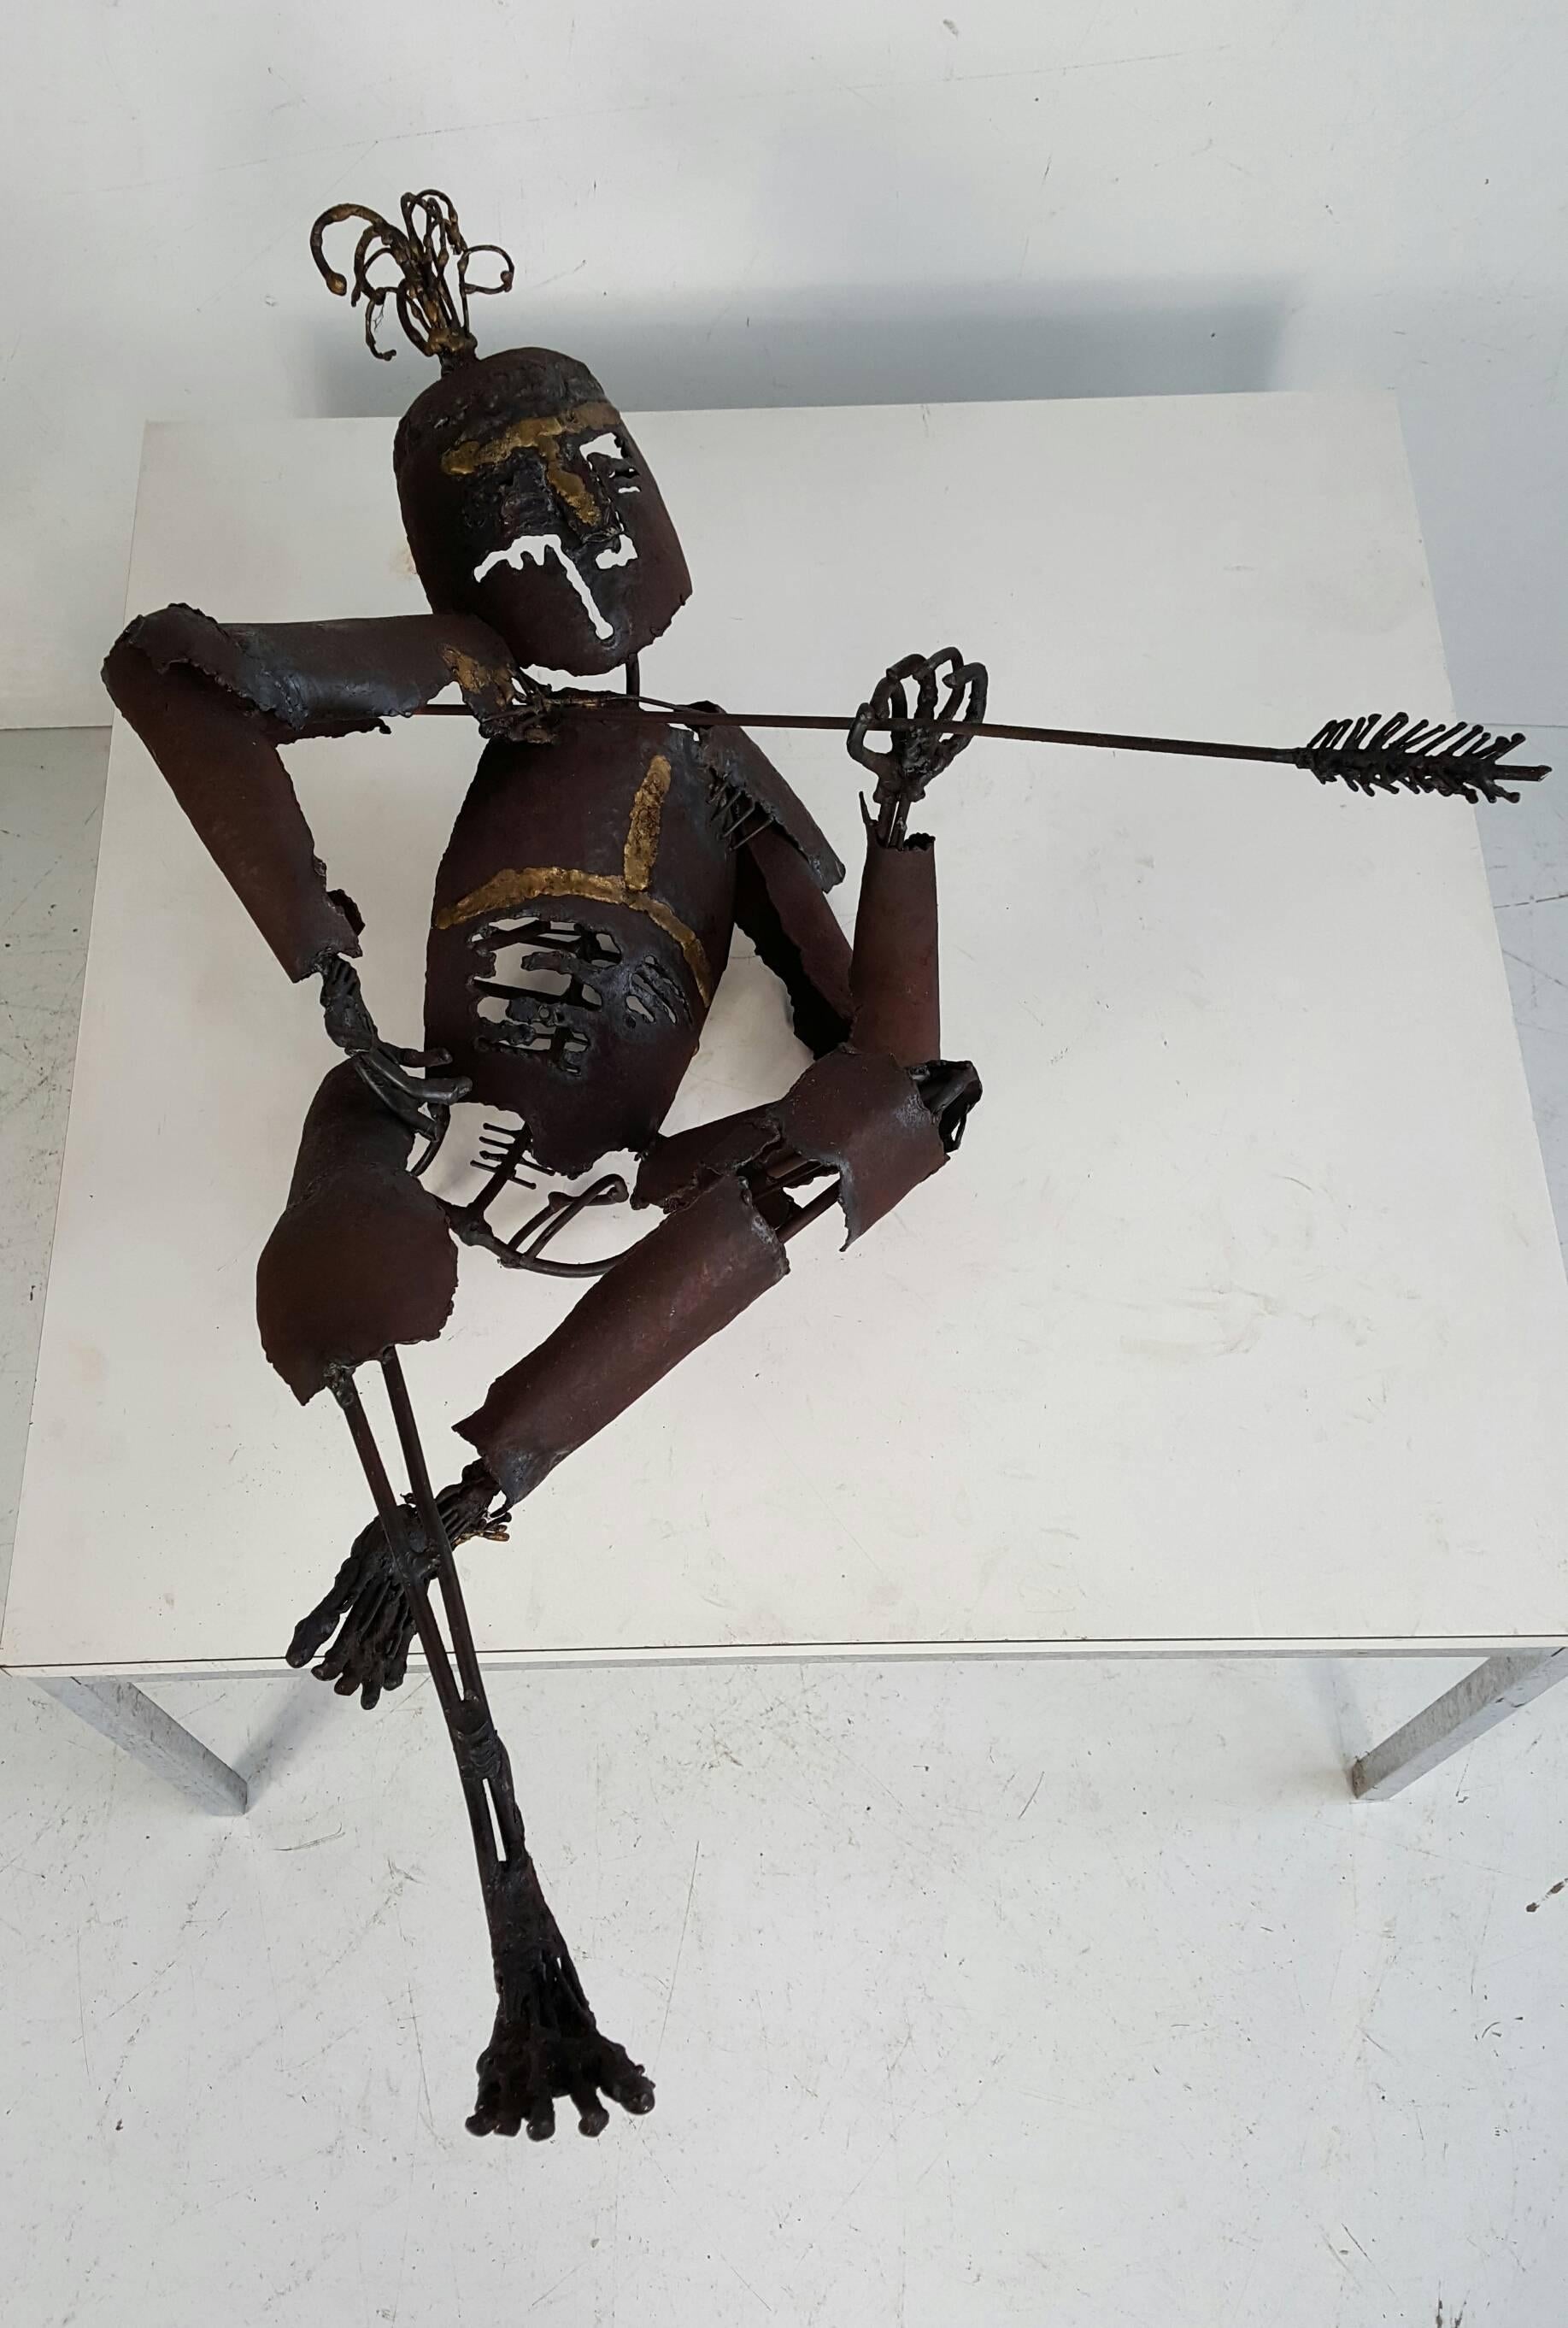 Wonderful Hand made,welded brutalist sculpture depicting man removing arrow,, Artist unknown but very well exicuted,,detailed hands ,,feet and rib-cage,, Done in the manner of Fantoni